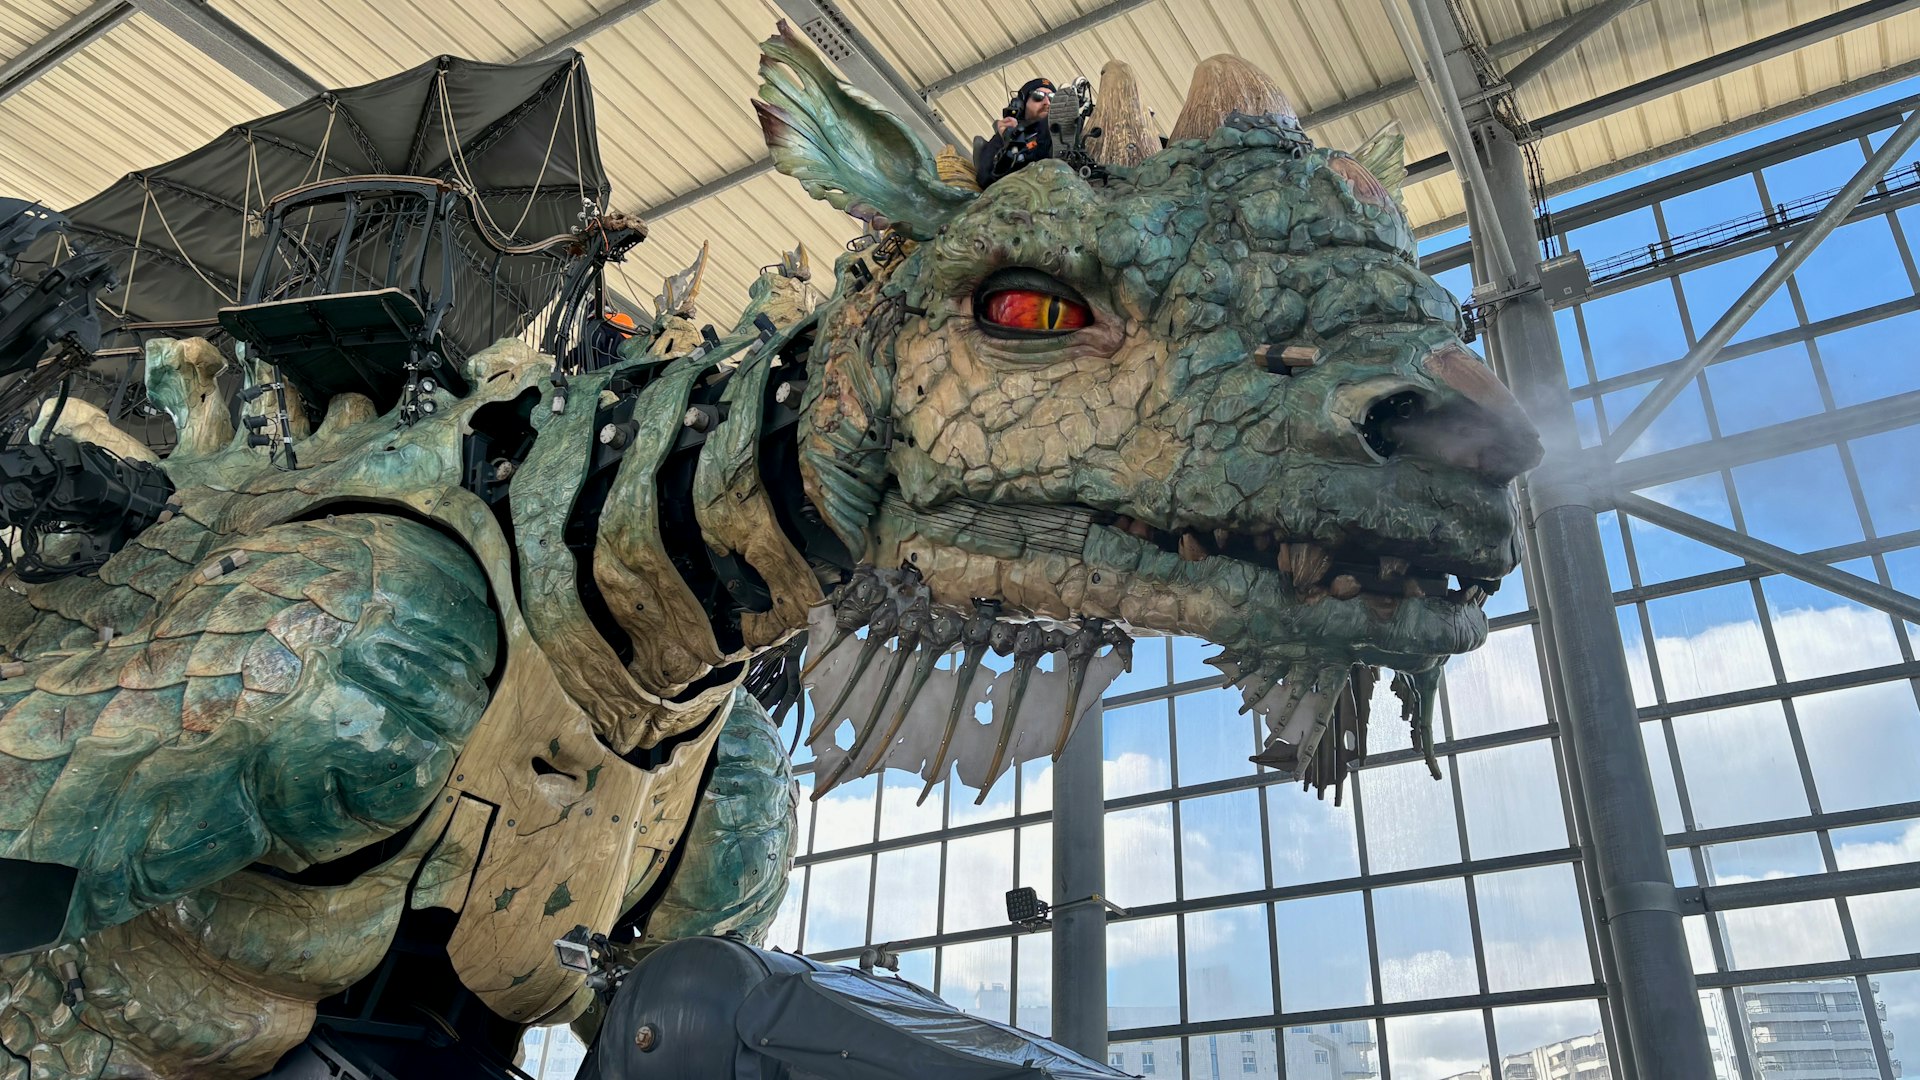 A huge mechanical dragon, controlled by a pilot using levels and pedals, sits in its transparent hangar